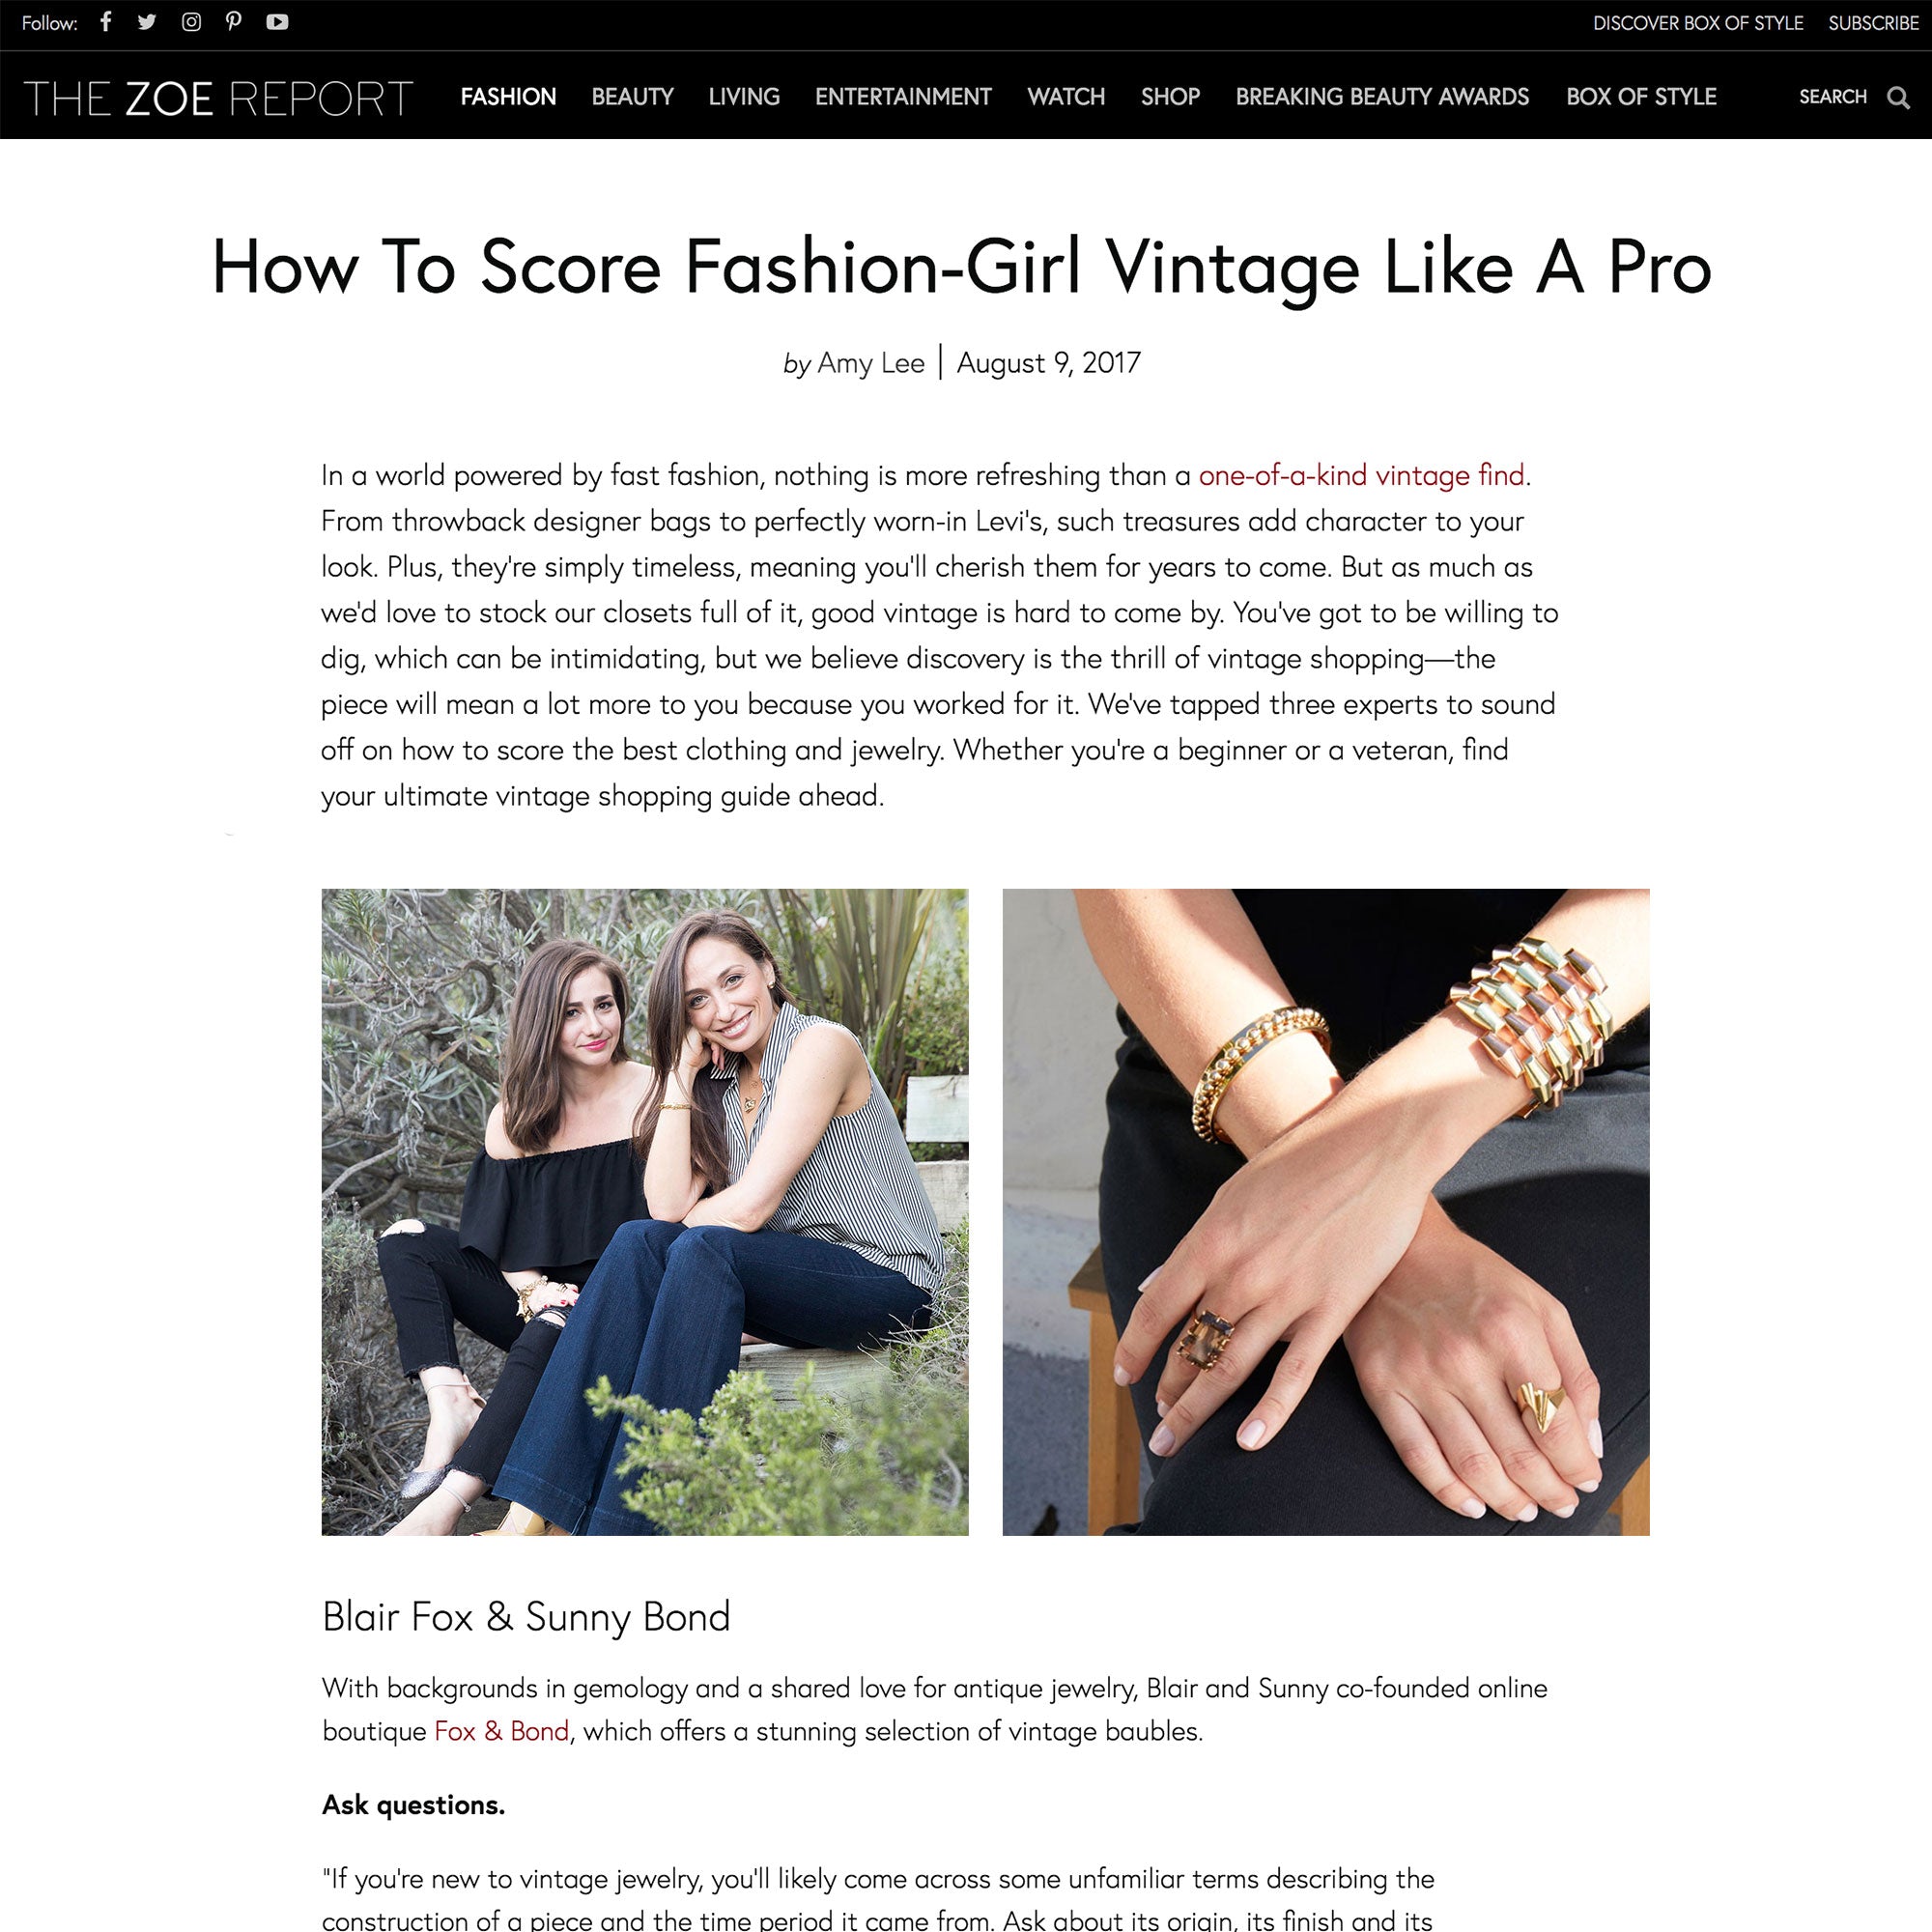 The Zoe Report: How To Score Fashion-Girl Vintage Like A Pro